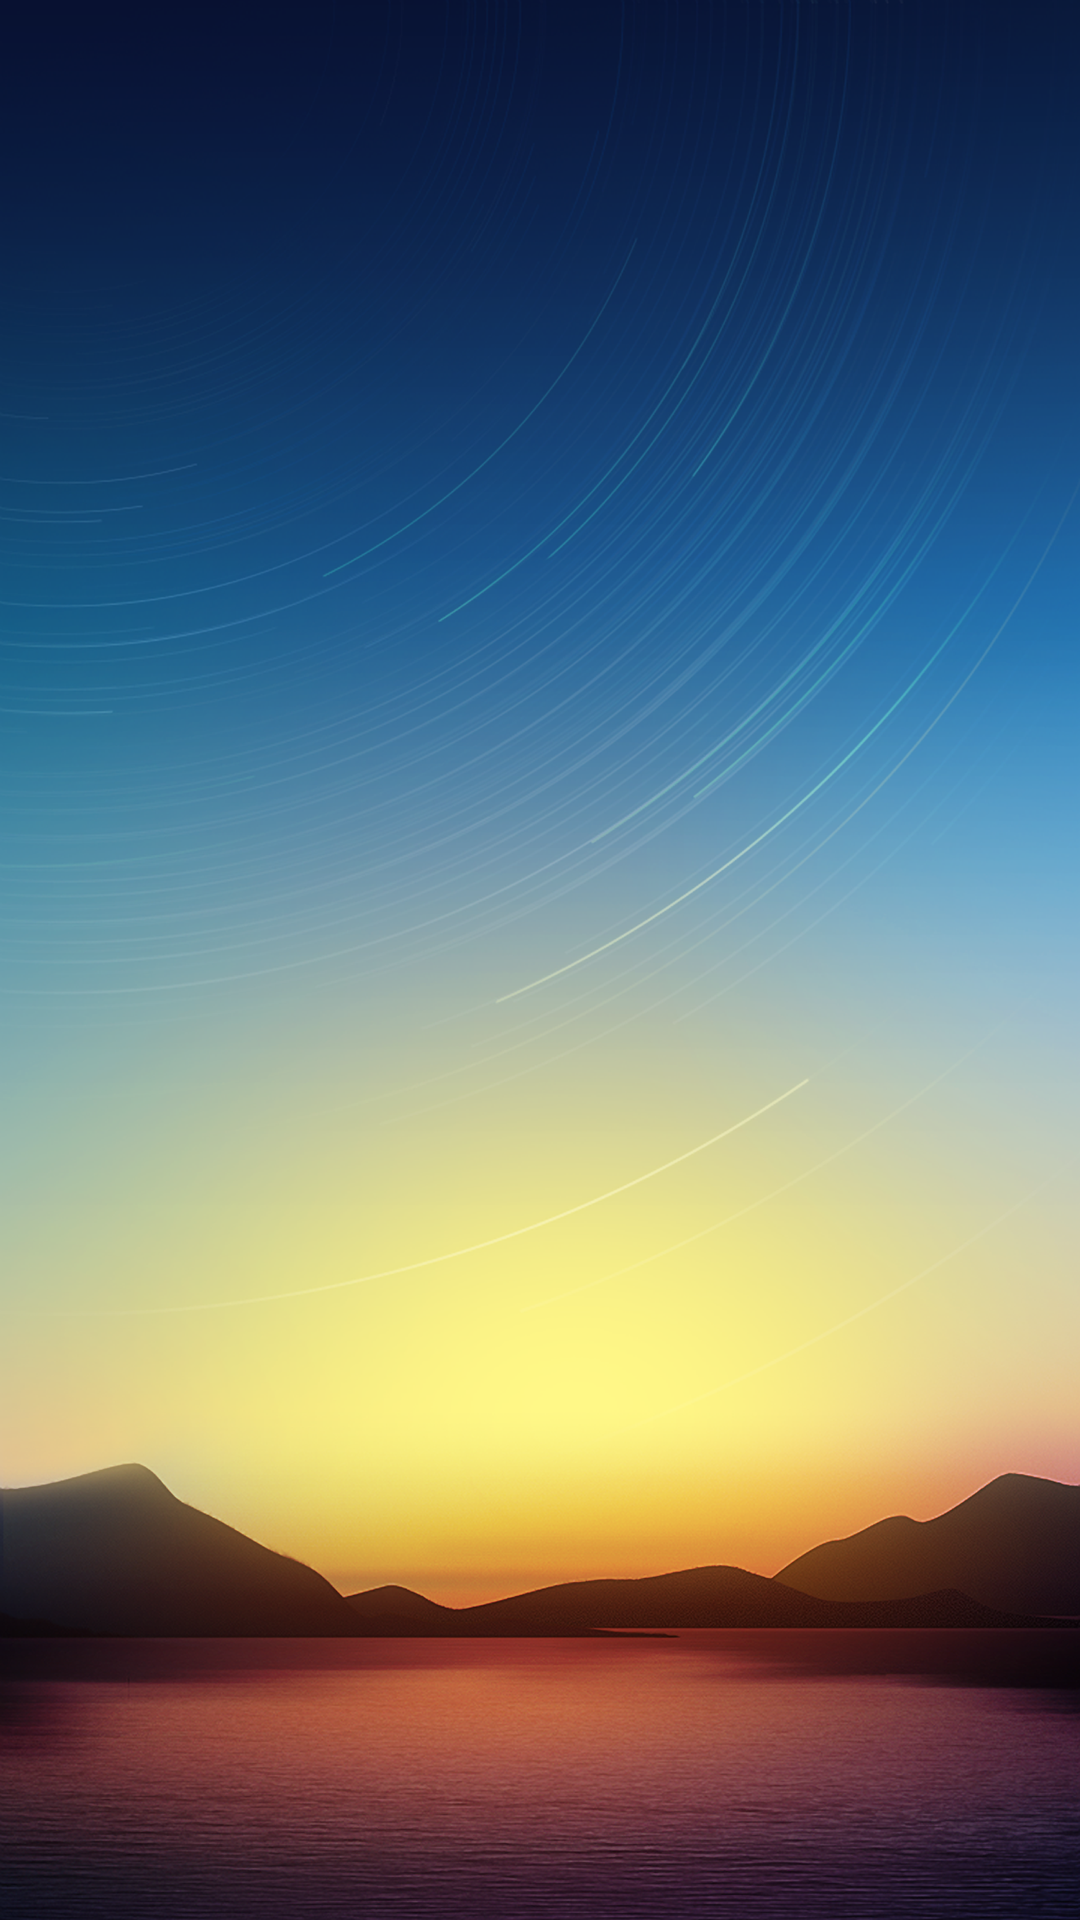 Sunset htc one wallpaper - Best htc one wallpapers, free and easy